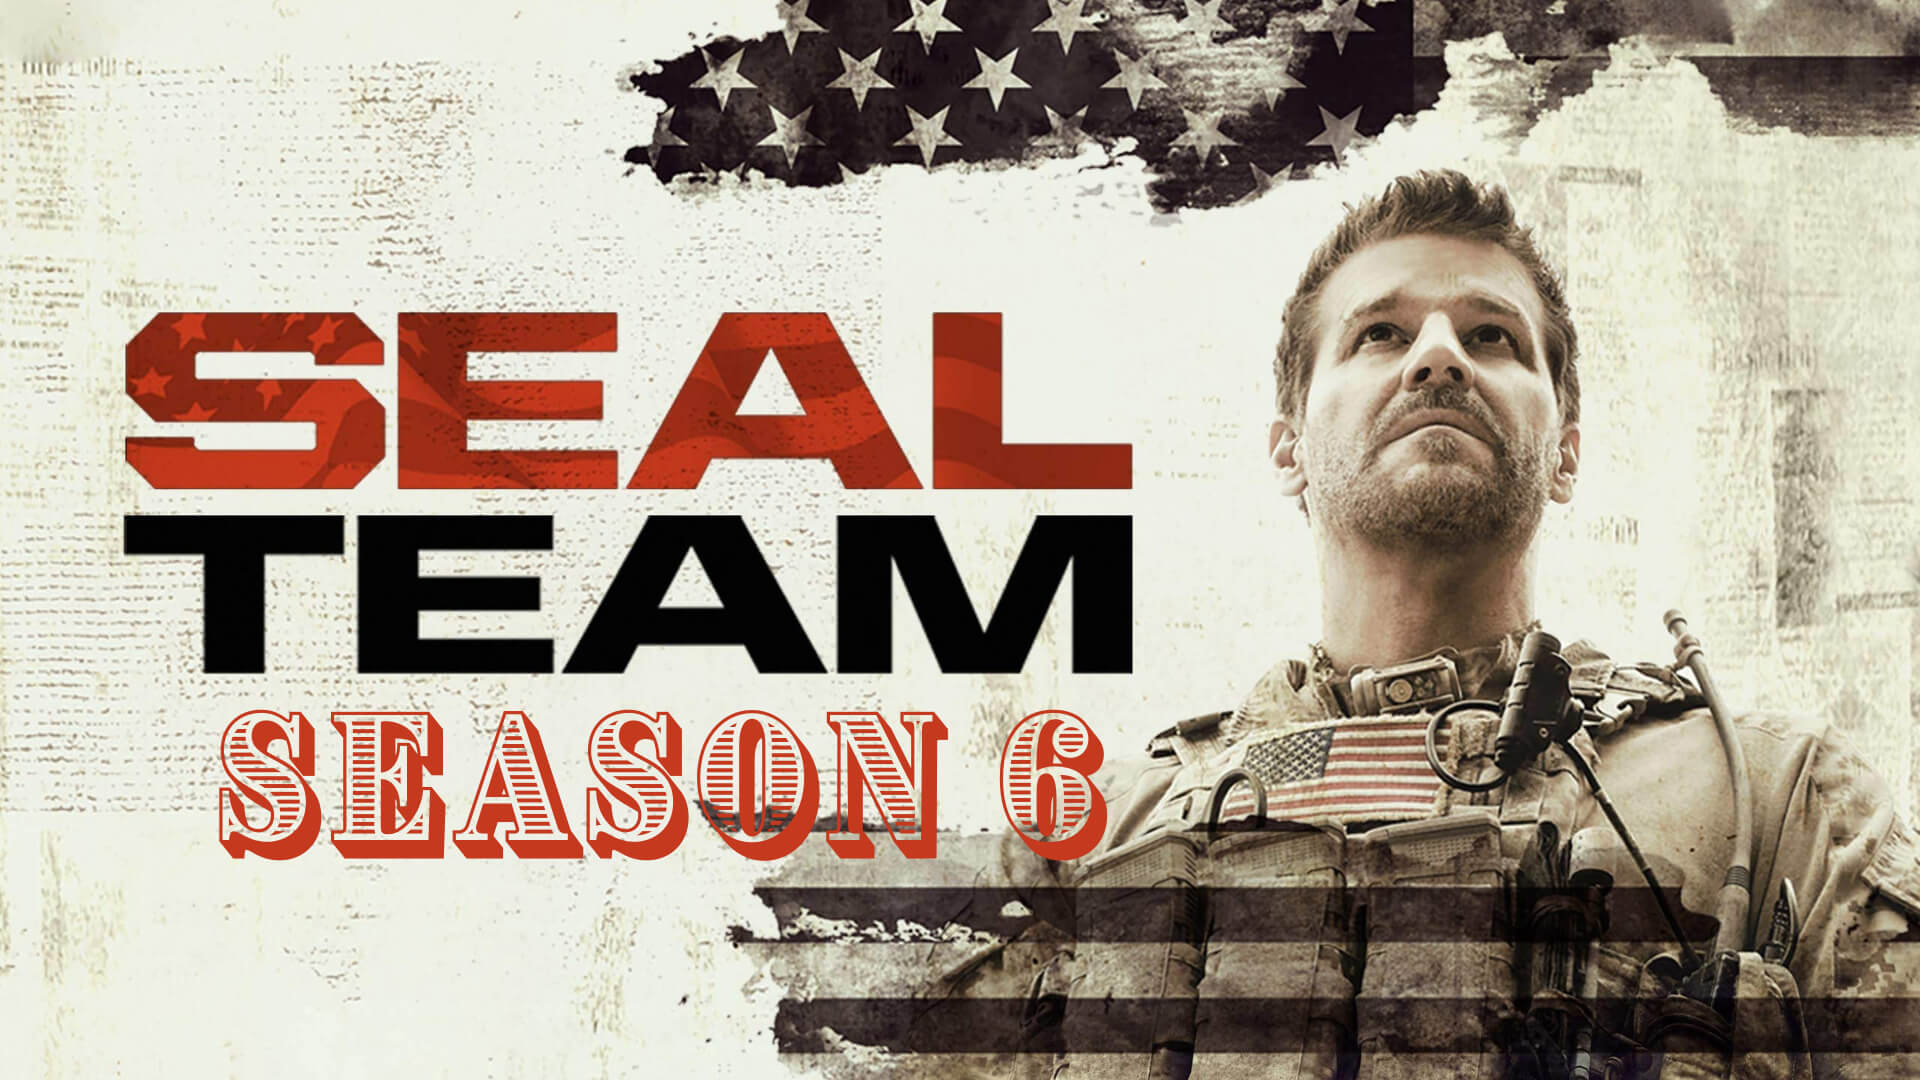 When Is Seal Team Season 6 Coming Out? (Release Date)